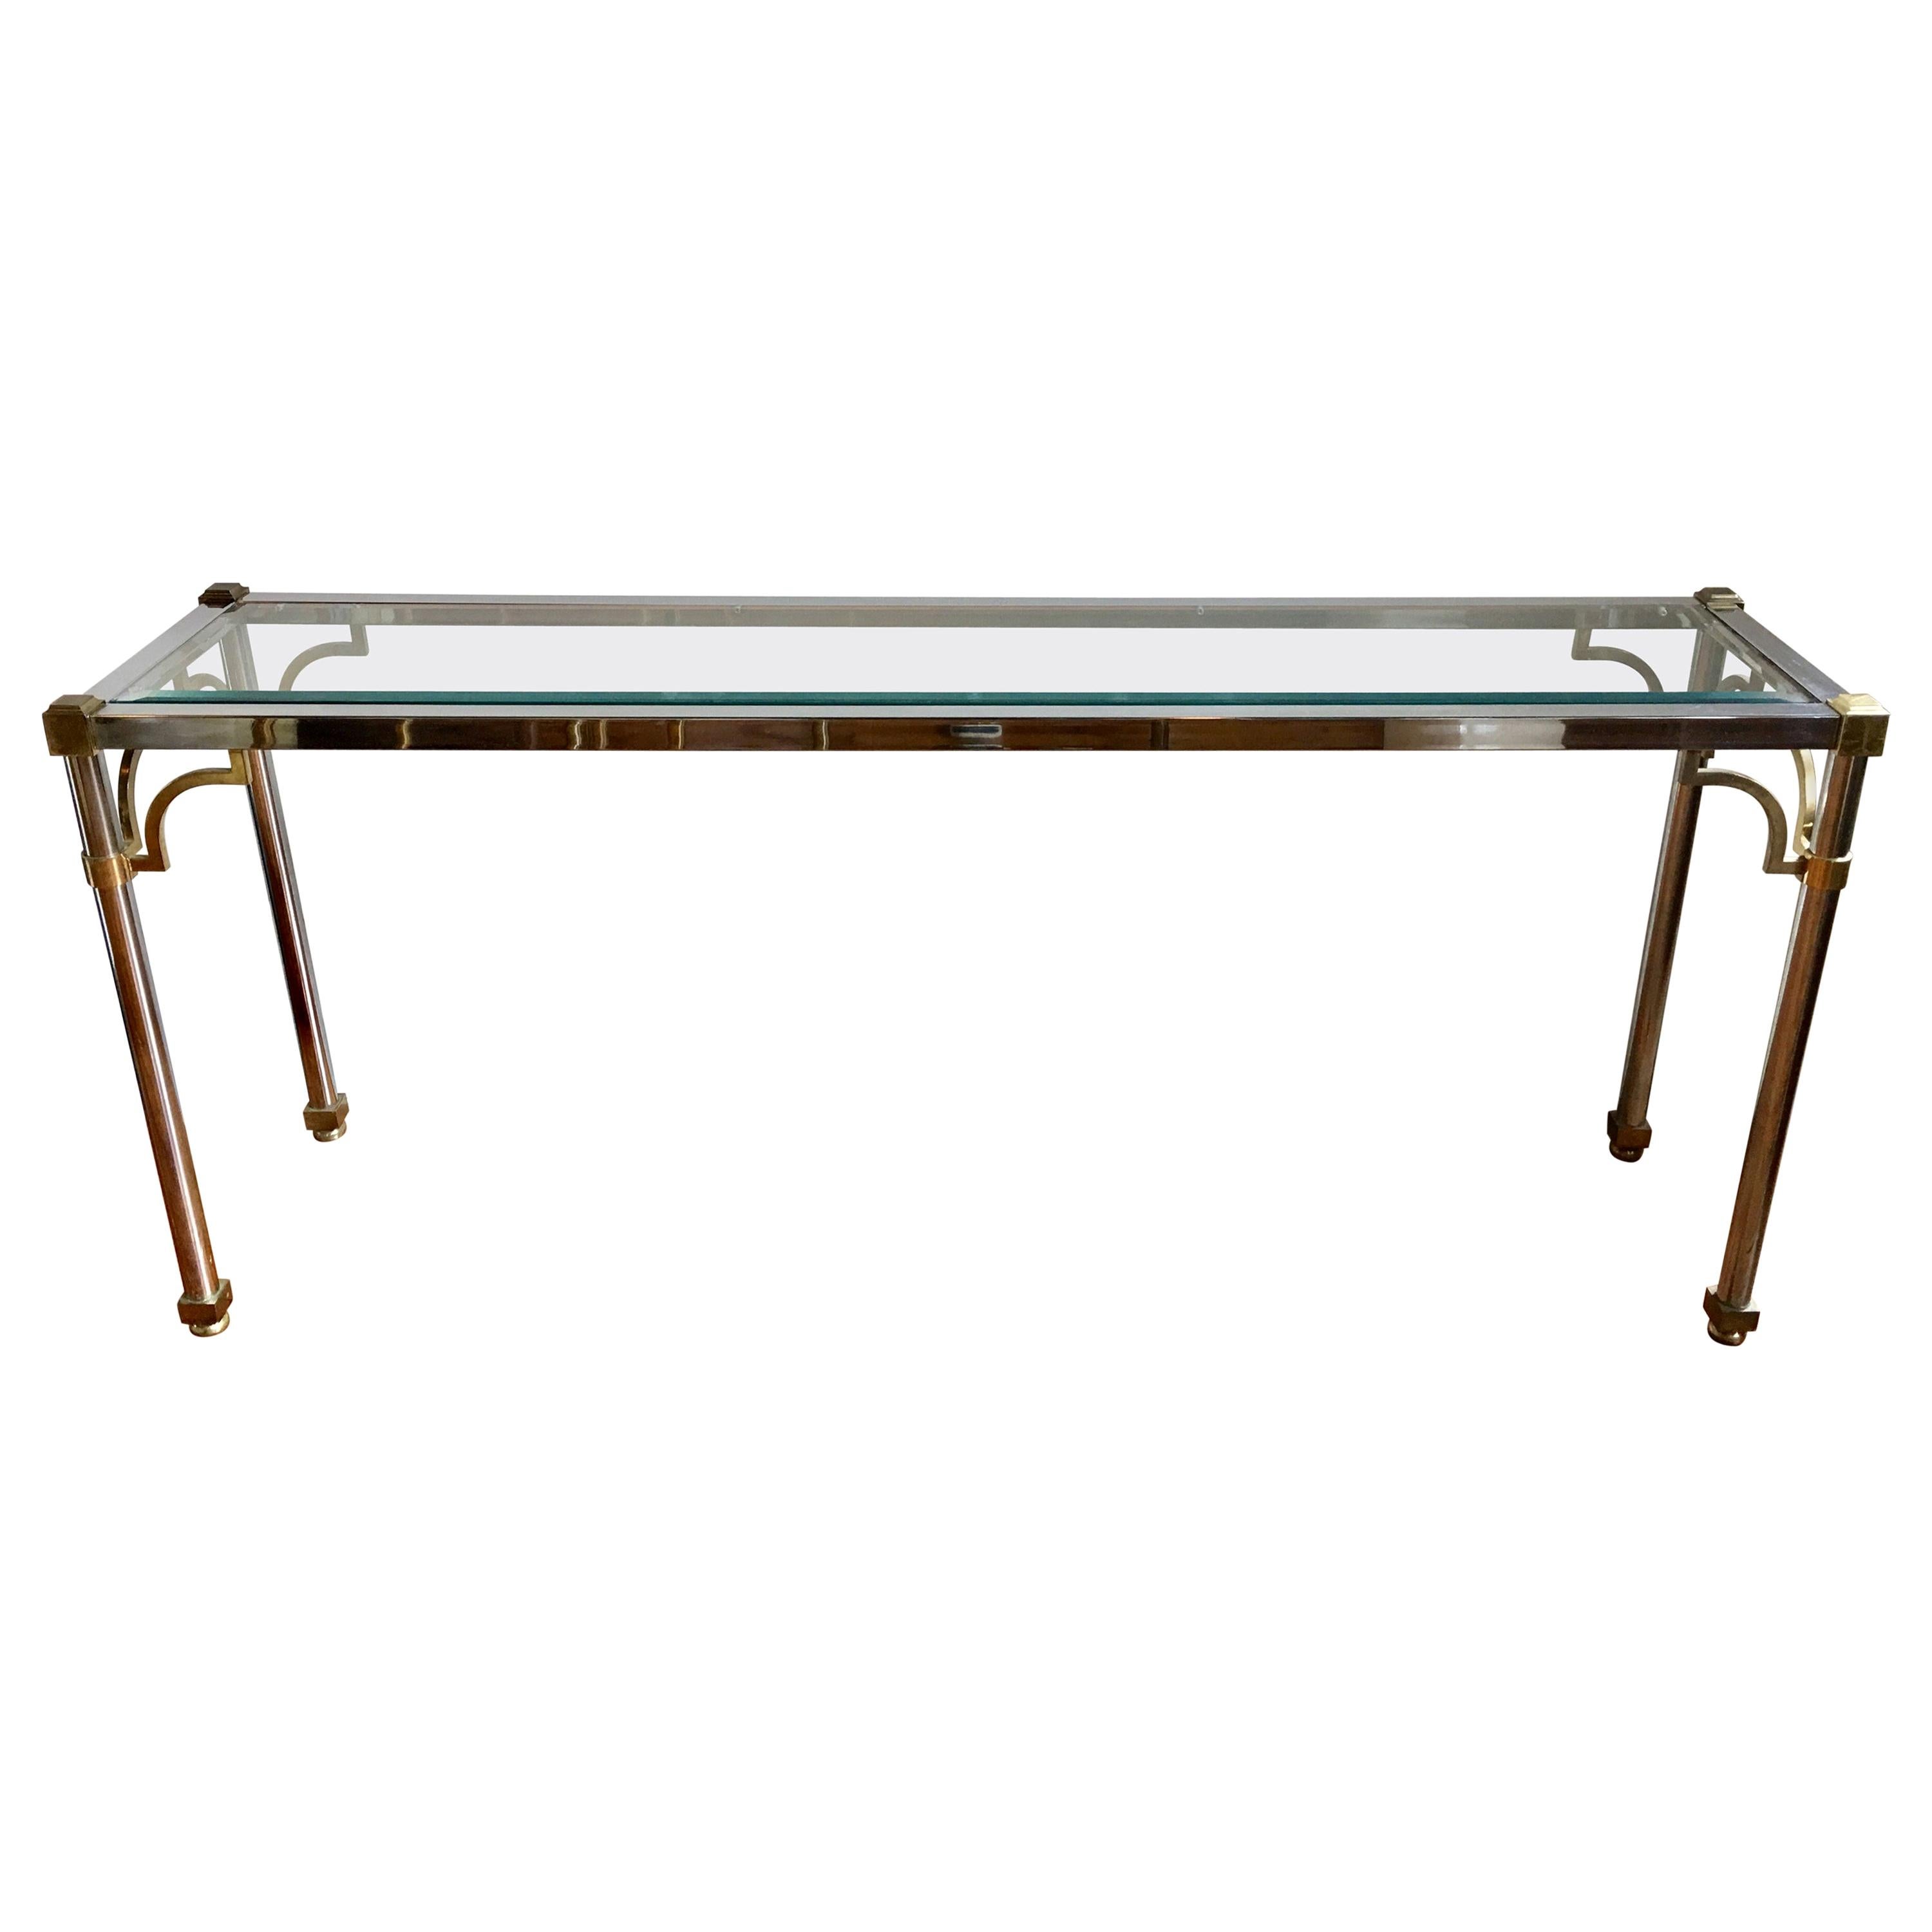 John Vesey Style Mid-Century Modern Brass Chrome & Glass Console Table, 1970s